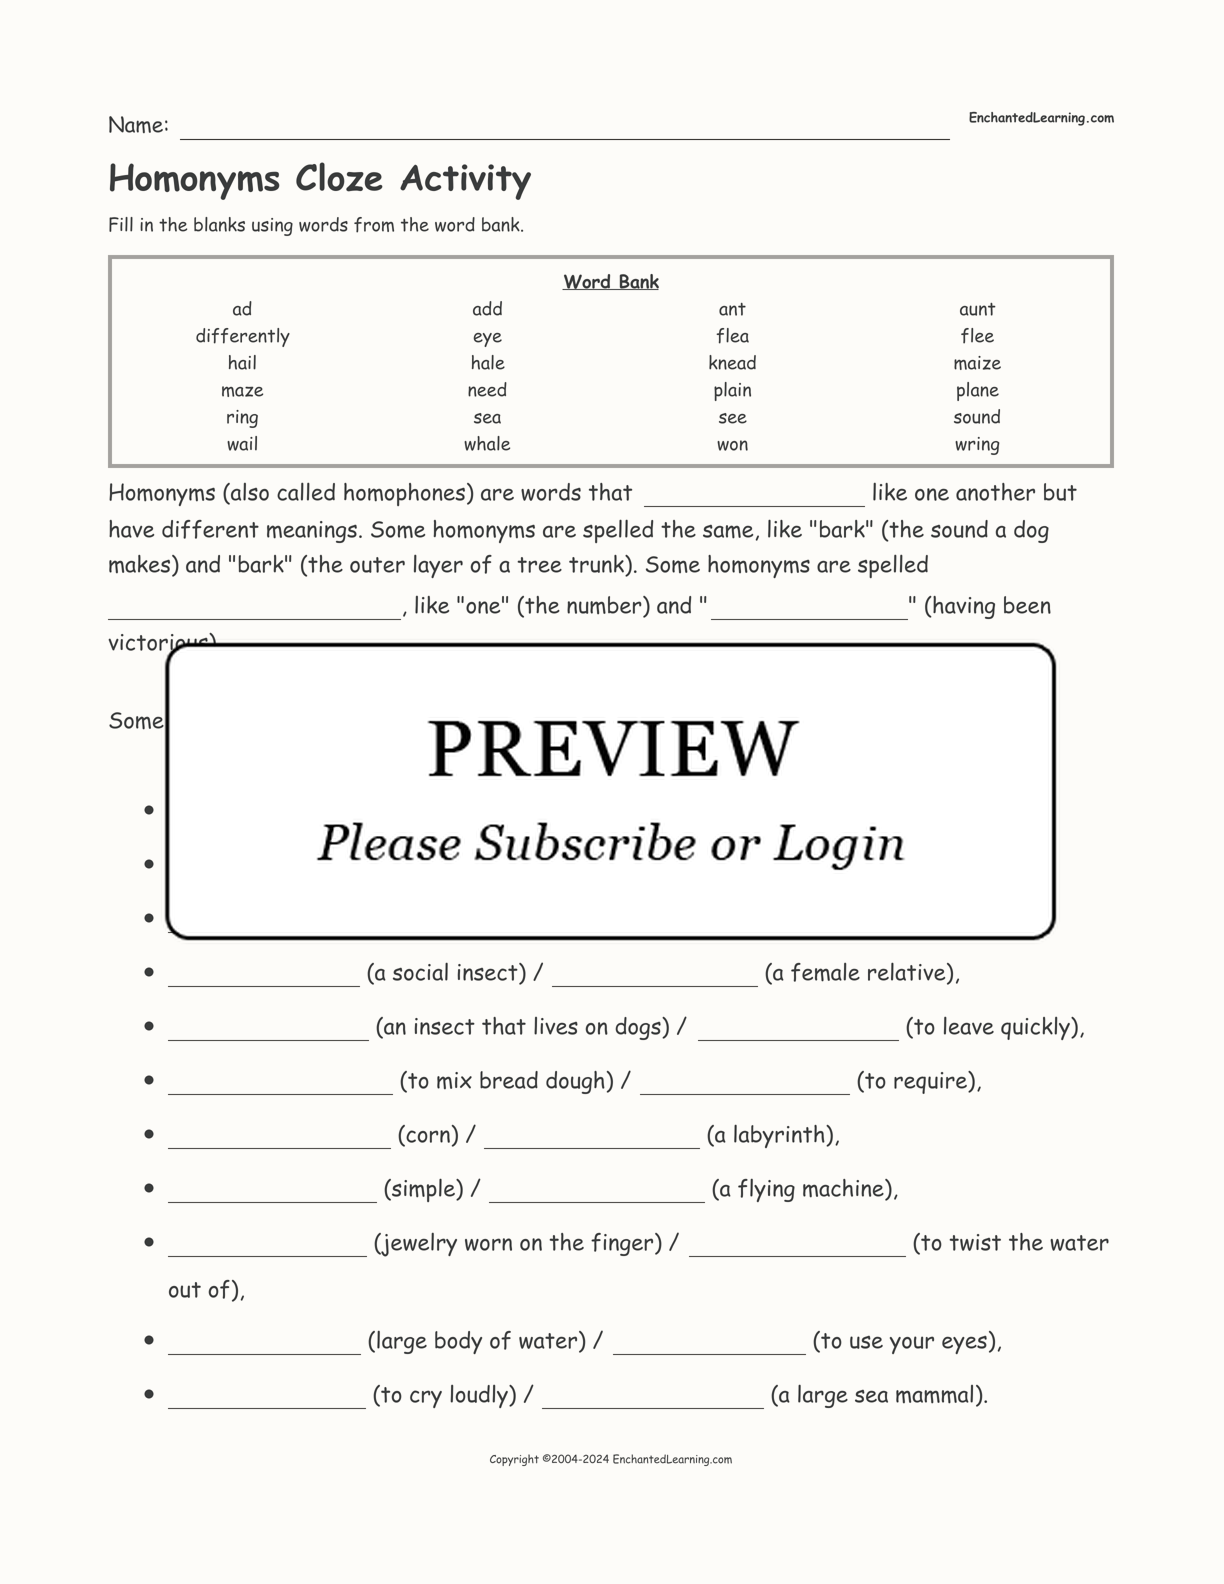 Homonyms Cloze Activity interactive worksheet page 1